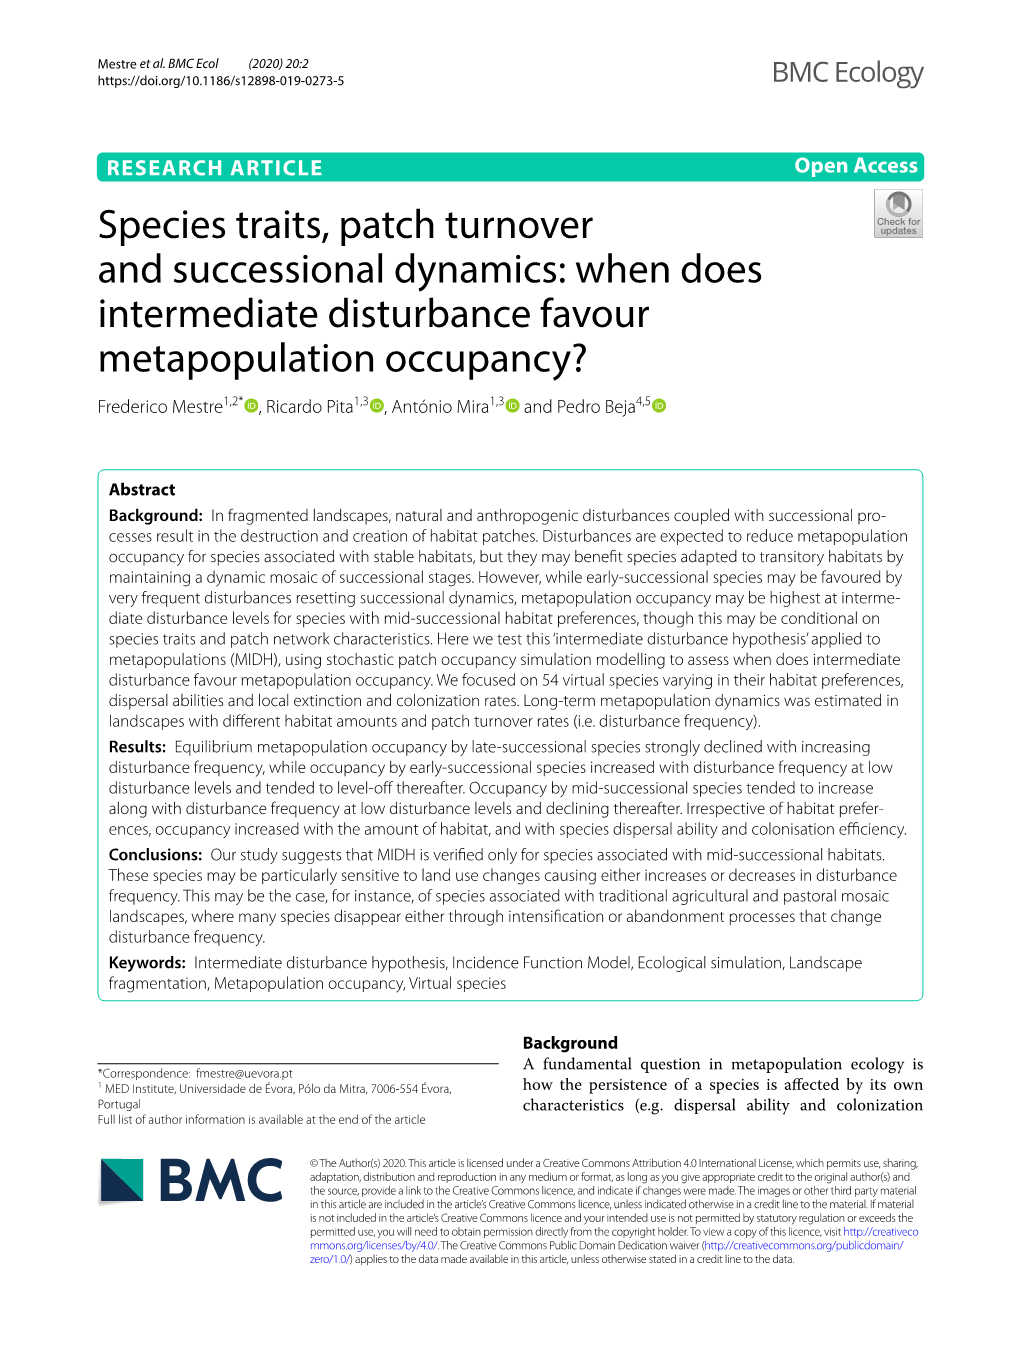 Species Traits, Patch Turnover and Successional